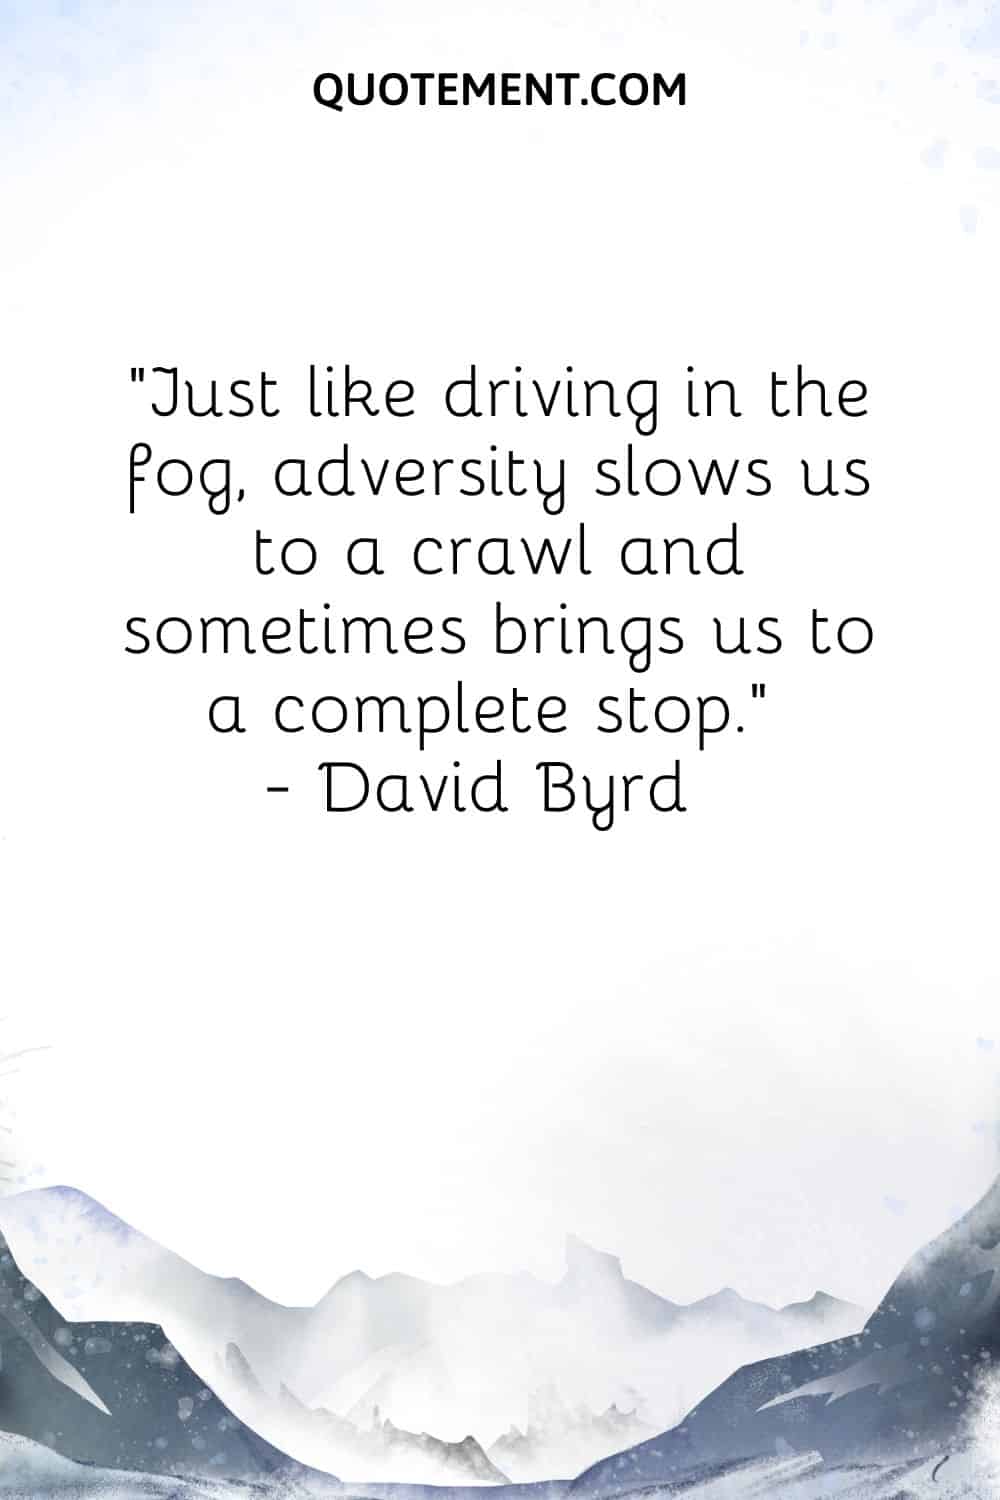 Just like driving in the fog, adversity slows us to a crawl and sometimes brings us to a complete stop